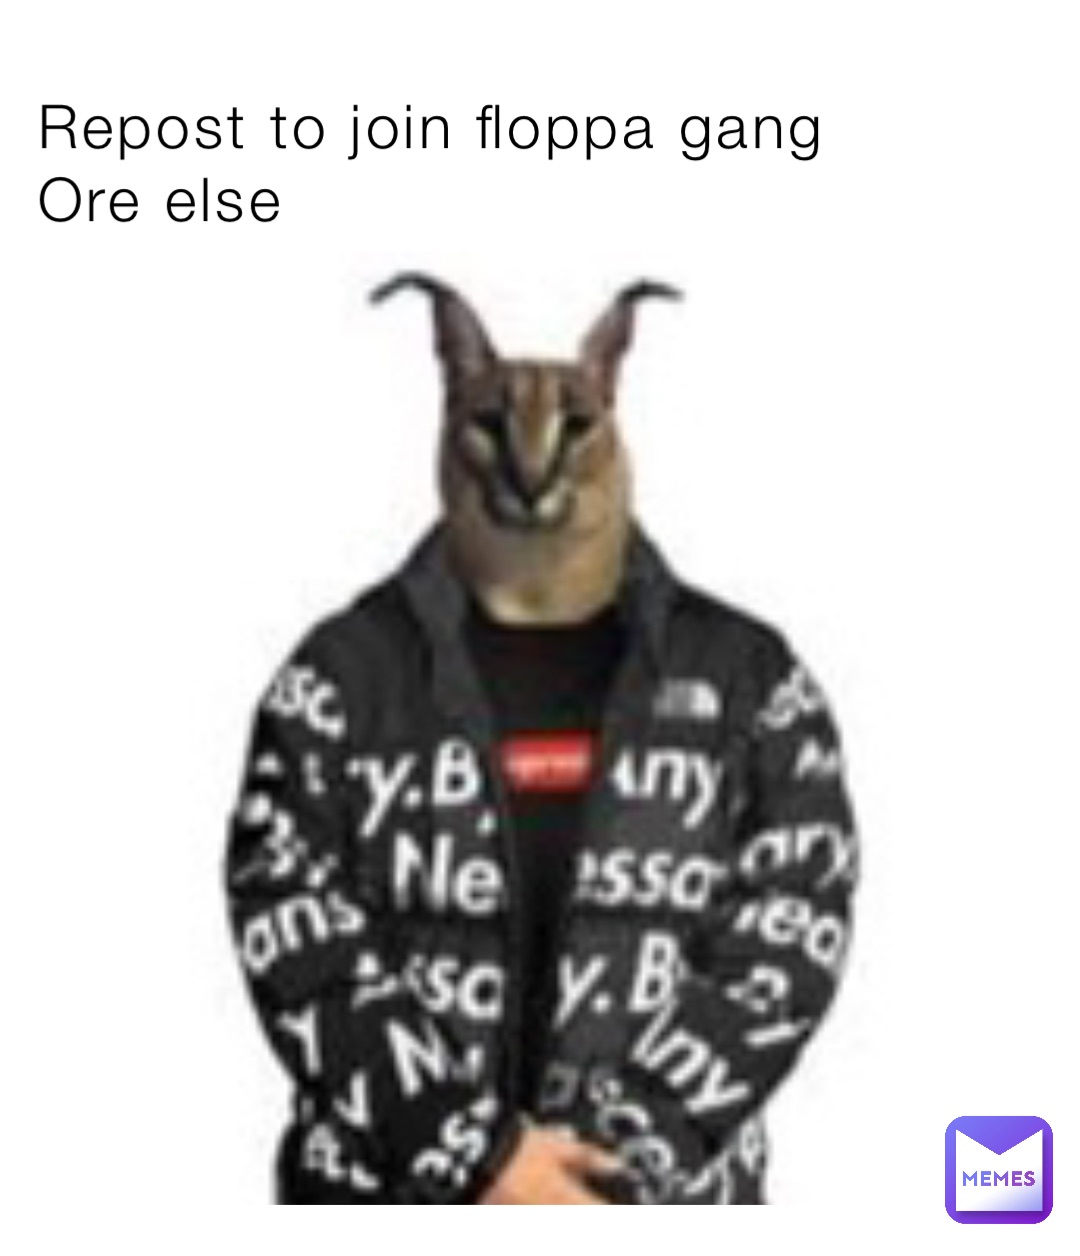 Repost to join floppa gang
Ore else